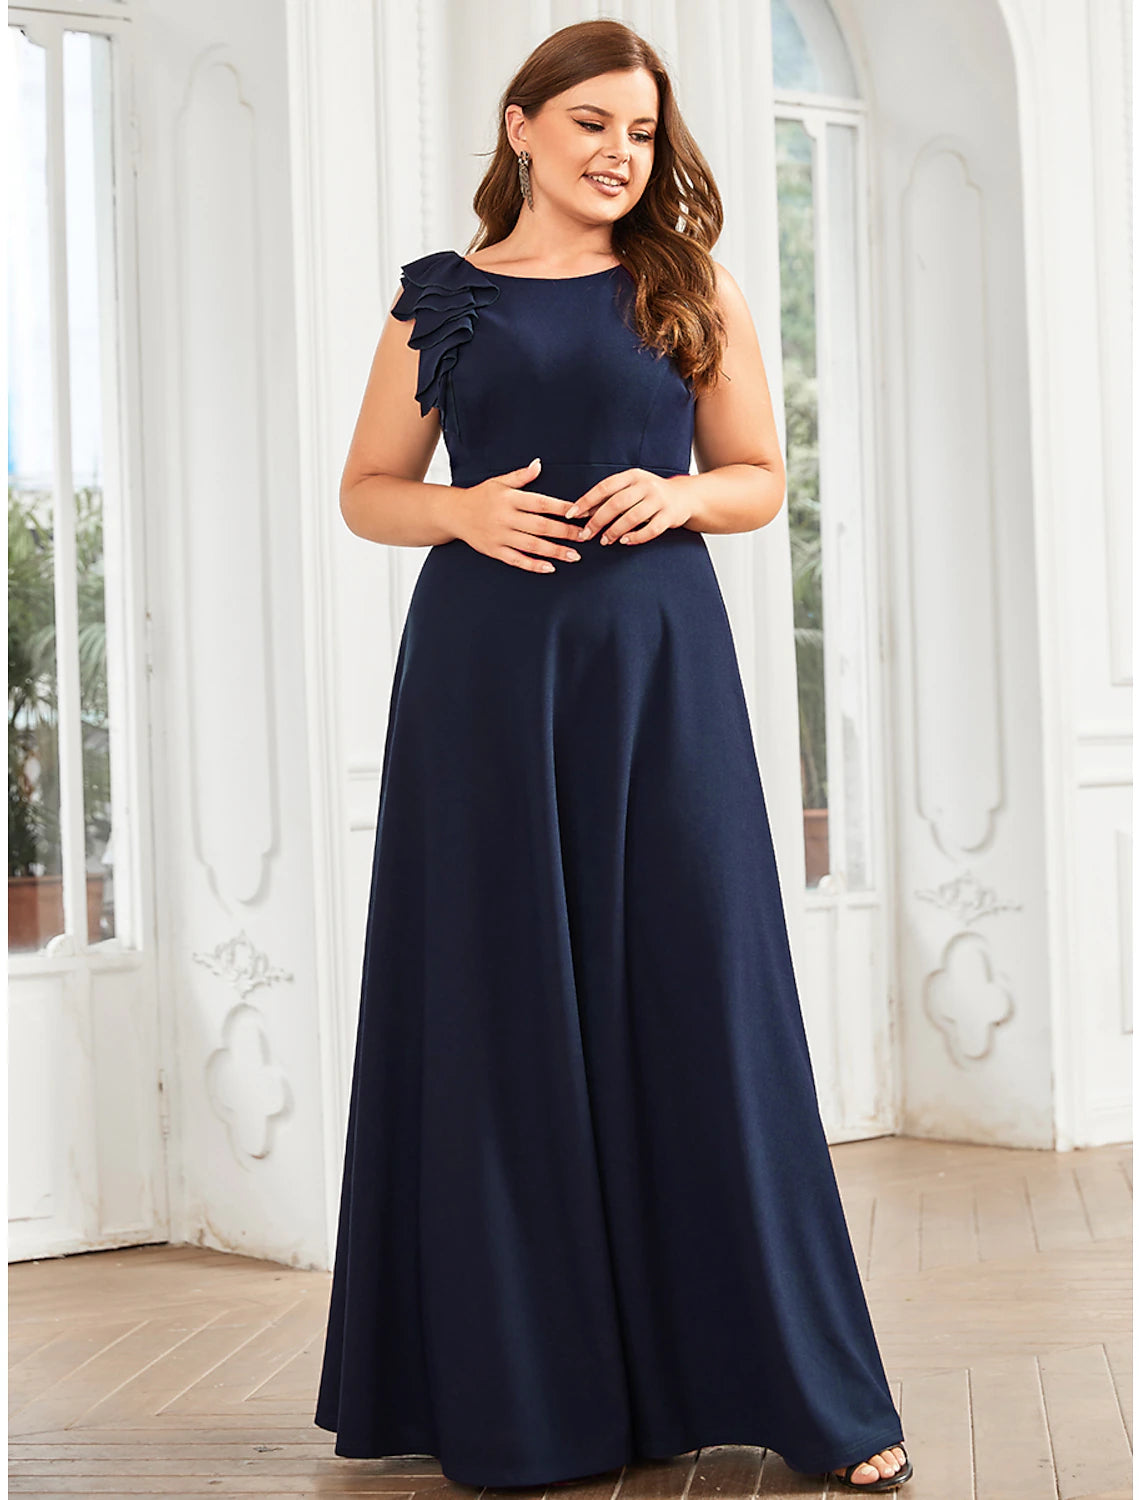 A-Line Evening Gown Plus Size Dress Formal Floor Length Sleeveless Jewel Neck Polyester with Draping Appliques Pure Color